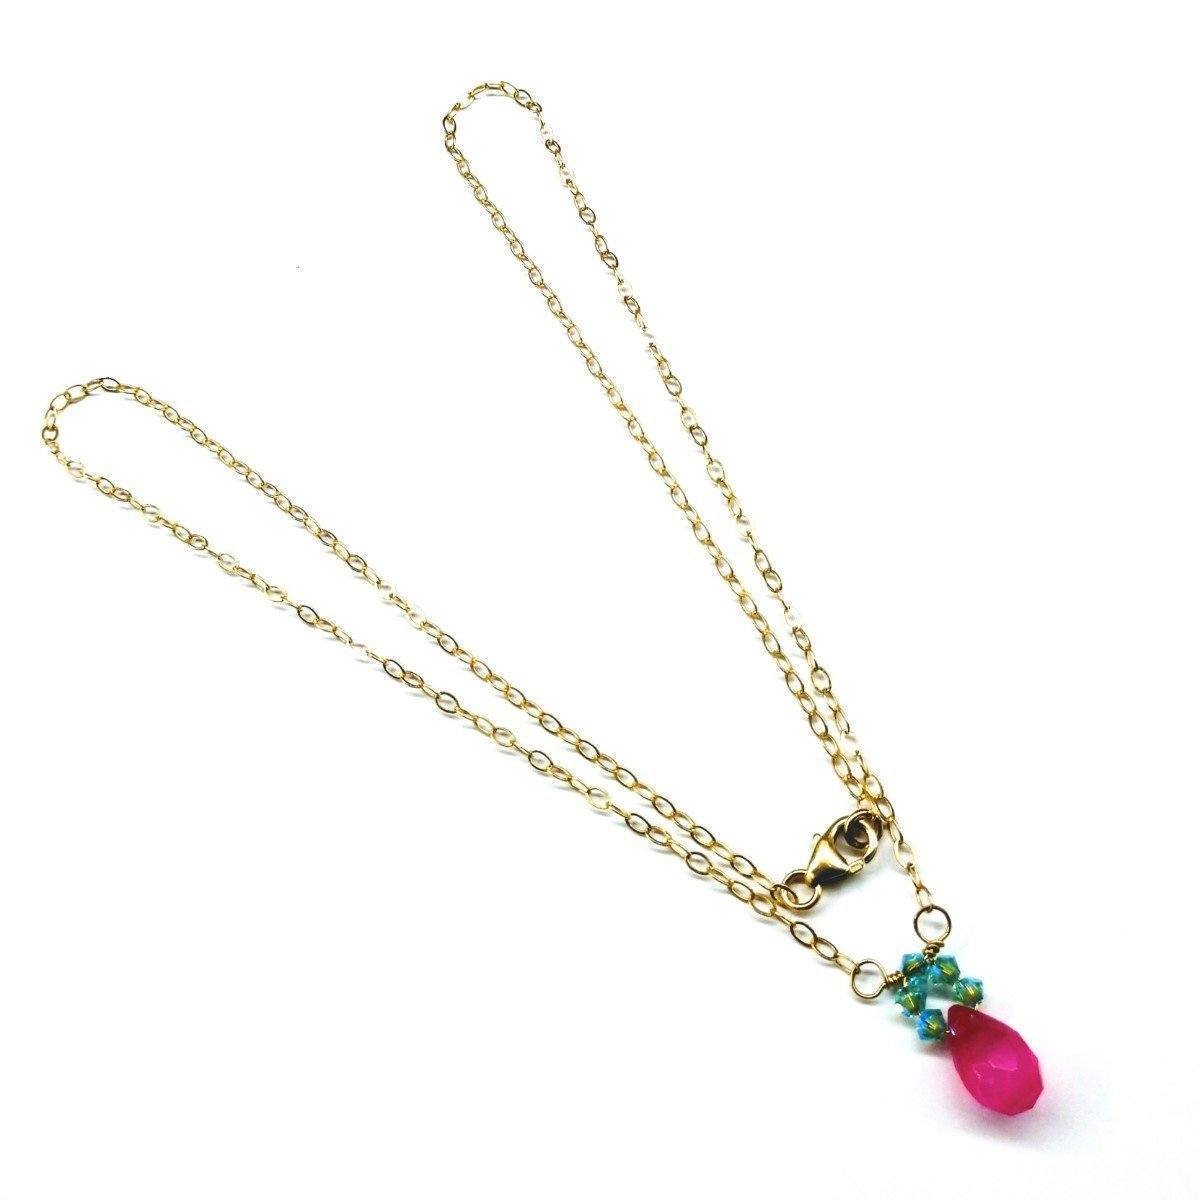 Pink Chalcedony and Turquoise Crystal Gold Necklace - Handcrafted 14K Wire Wrap with Swarovski Crystals, 18" Length - Necklaces - Bijou Her -  -  - 